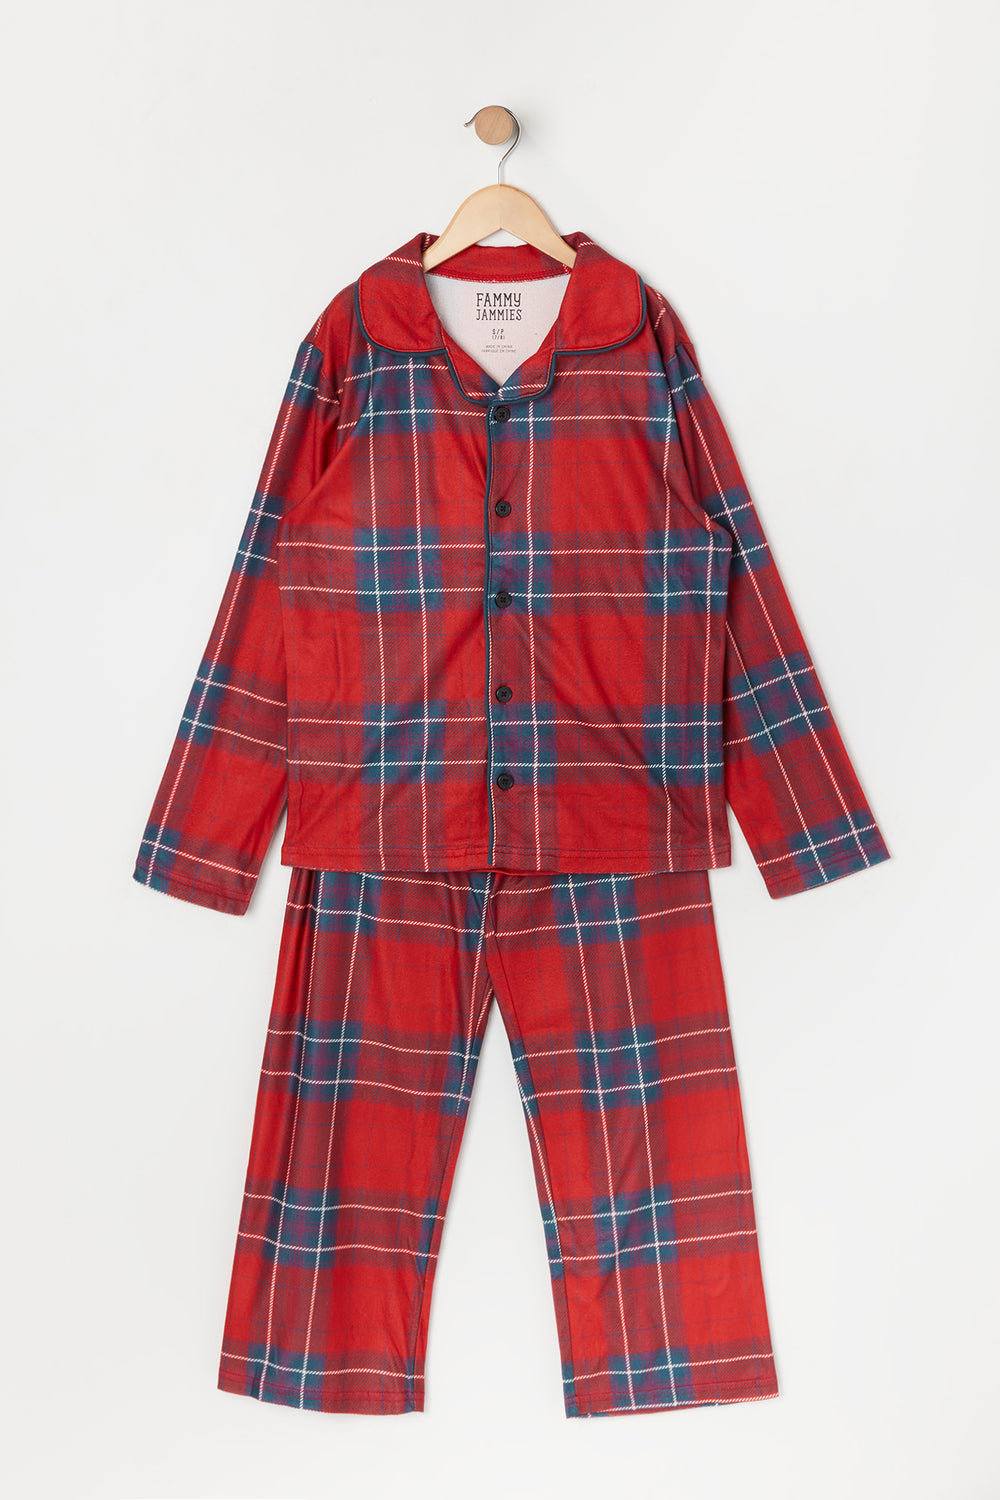 Youth Matching the Family Holiday Plaid Flannel 2 Piece Pajama Set Youth Matching the Family Holiday Plaid Flannel 2 Piece Pajama Set 1